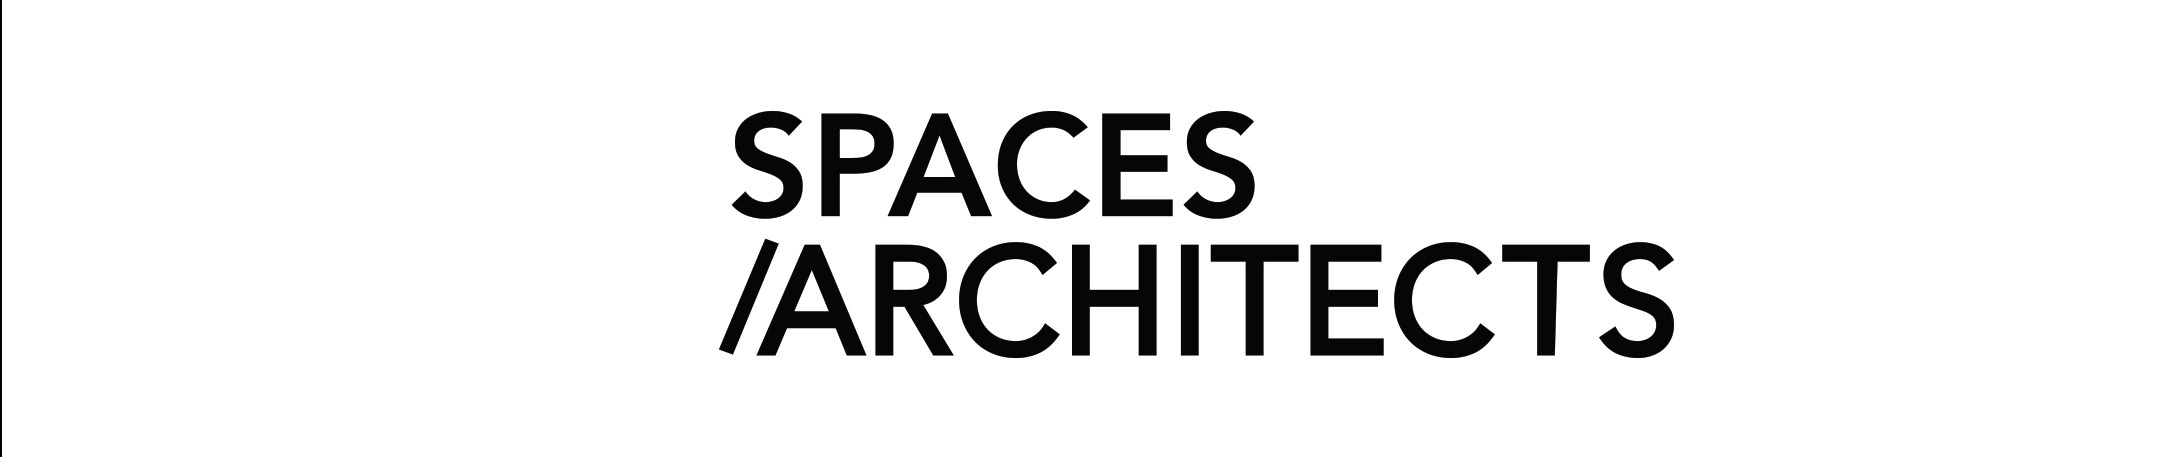 SPACES / ARCHITECTS's profile banner